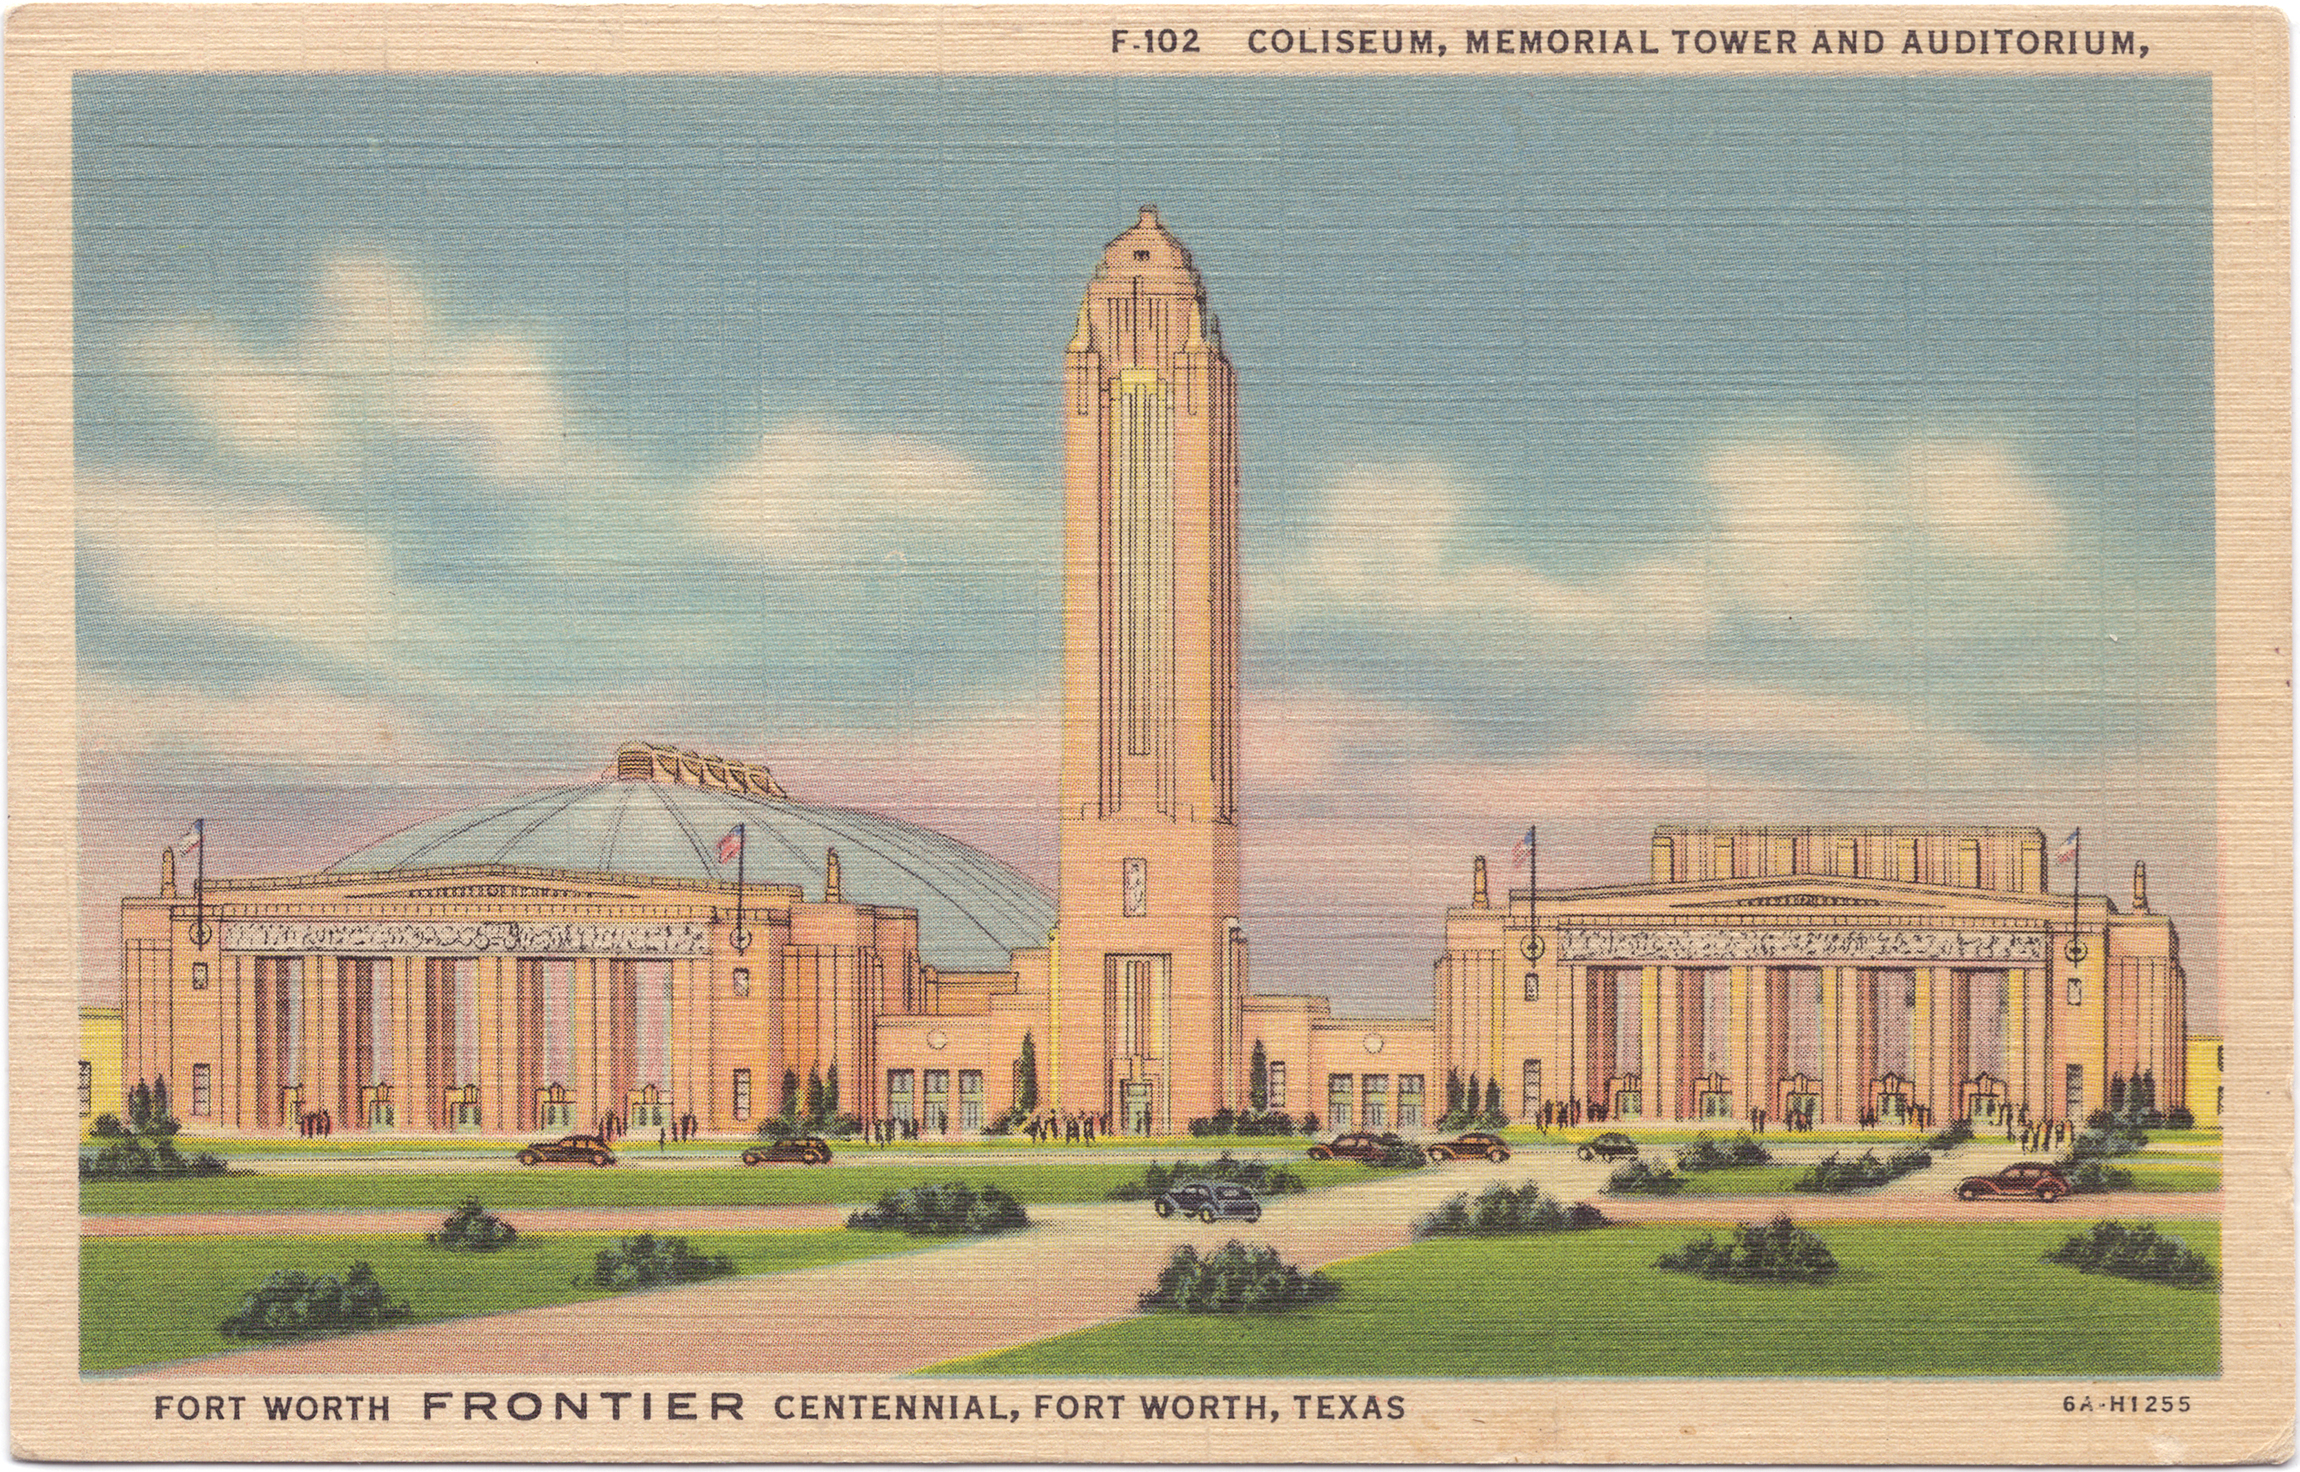 Postcard of the Will Rogers Coliseum, Memorial Tower, and Auditorium in Fort Worth